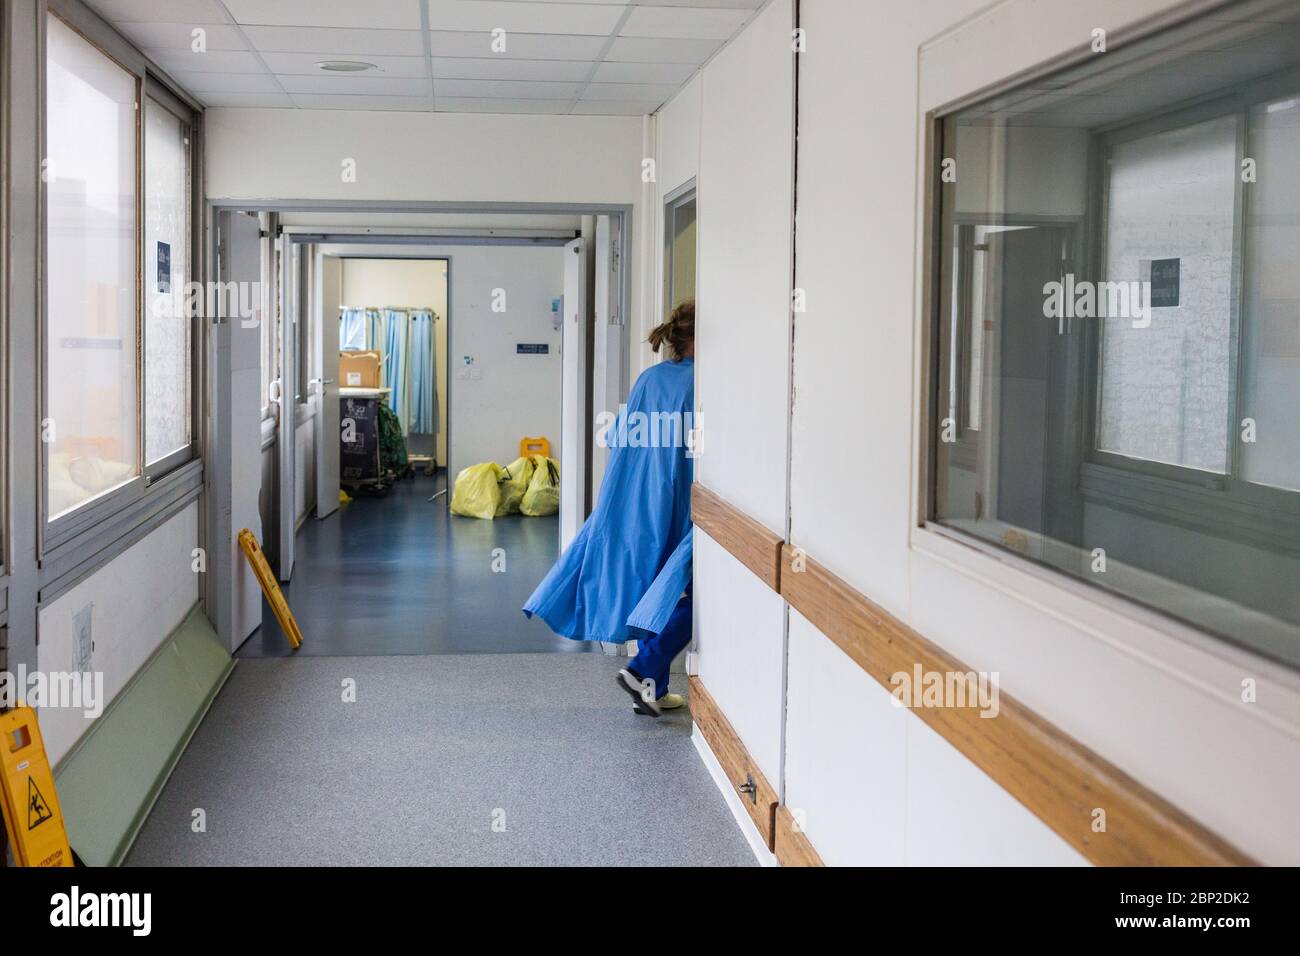 Intensive care, patients affected by Covid 19, Bordeaux hospital, France. Stock Photo